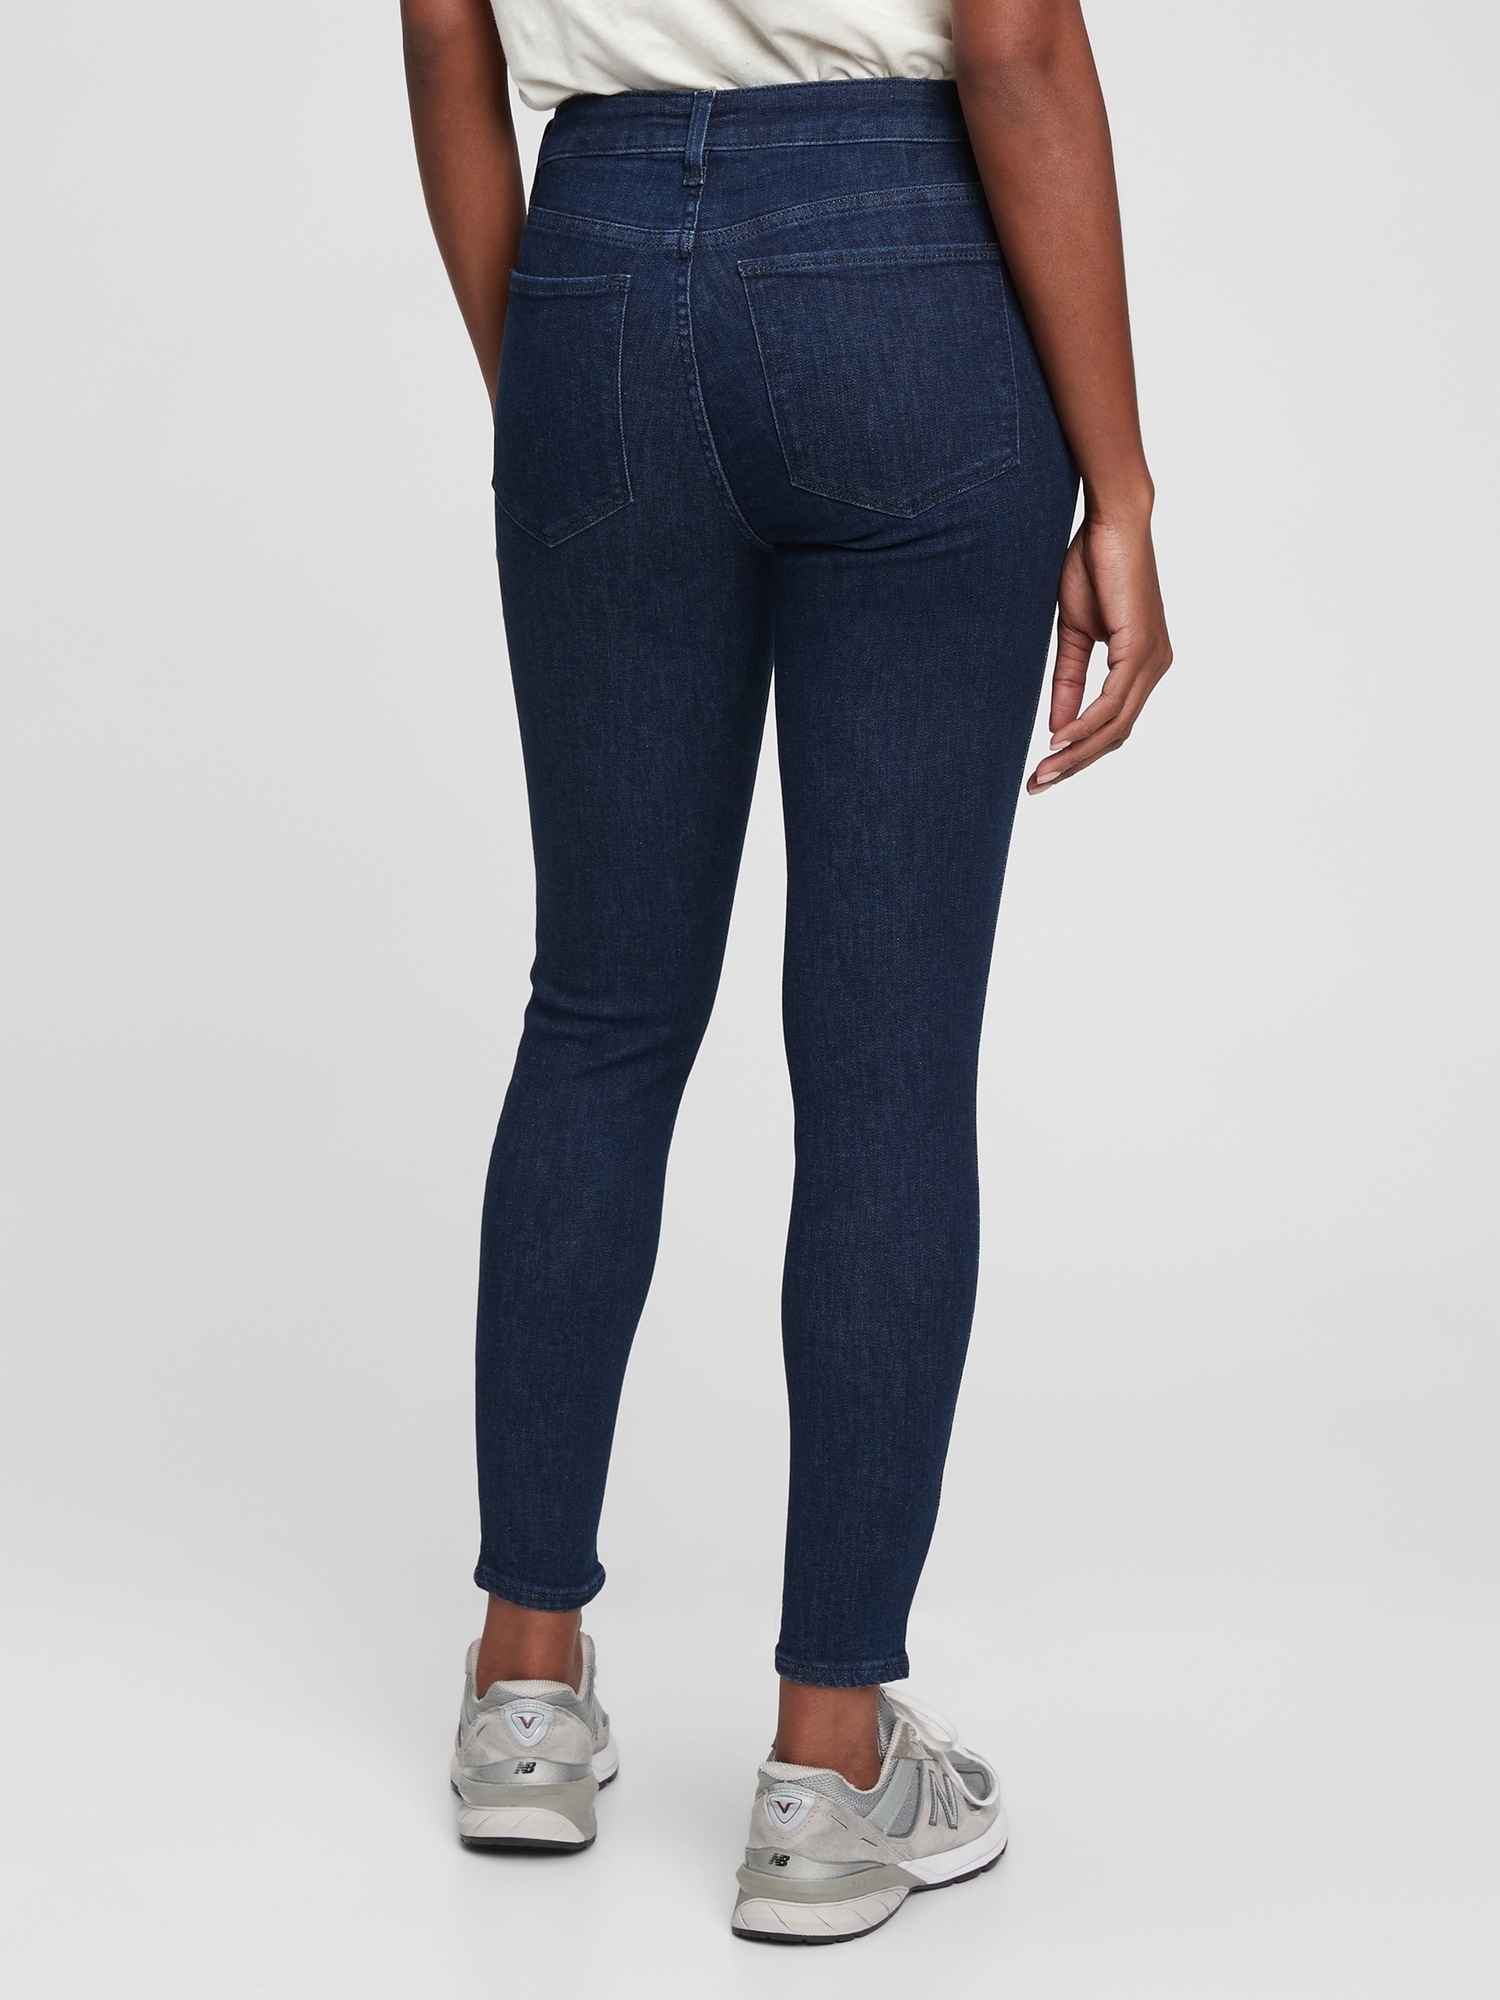 Mid Rise Universal Jegging with Washwell | Gap